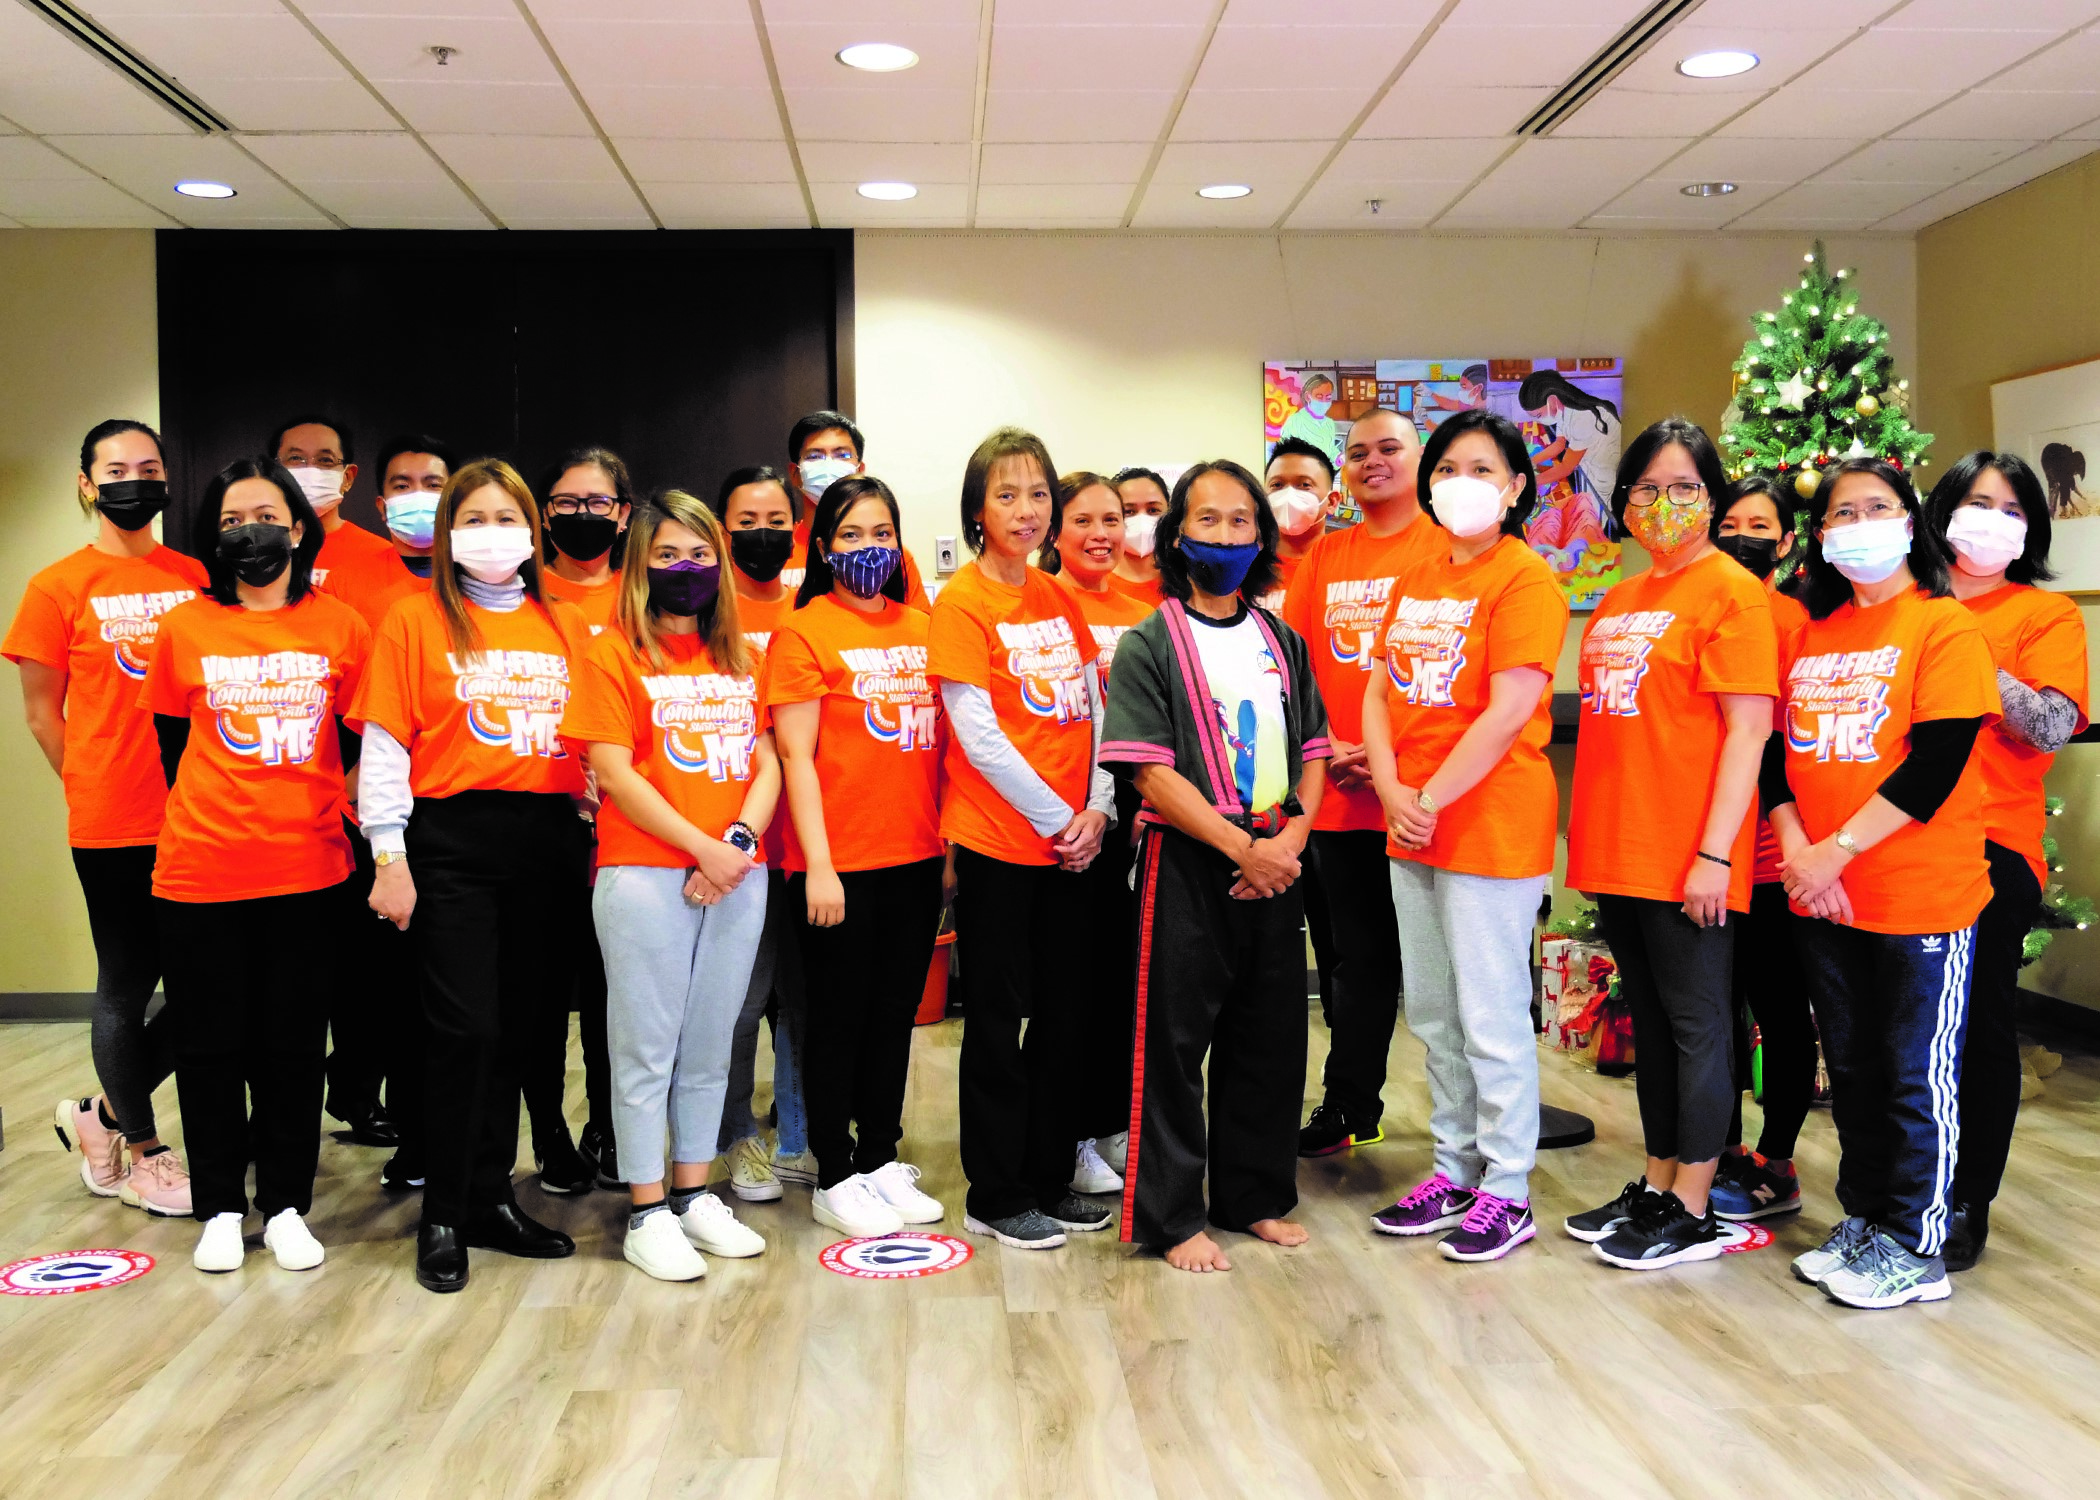 PH Consulate General in Vancouver Organizes Krav Maga Self-Defense Session in support of end VAW campaign